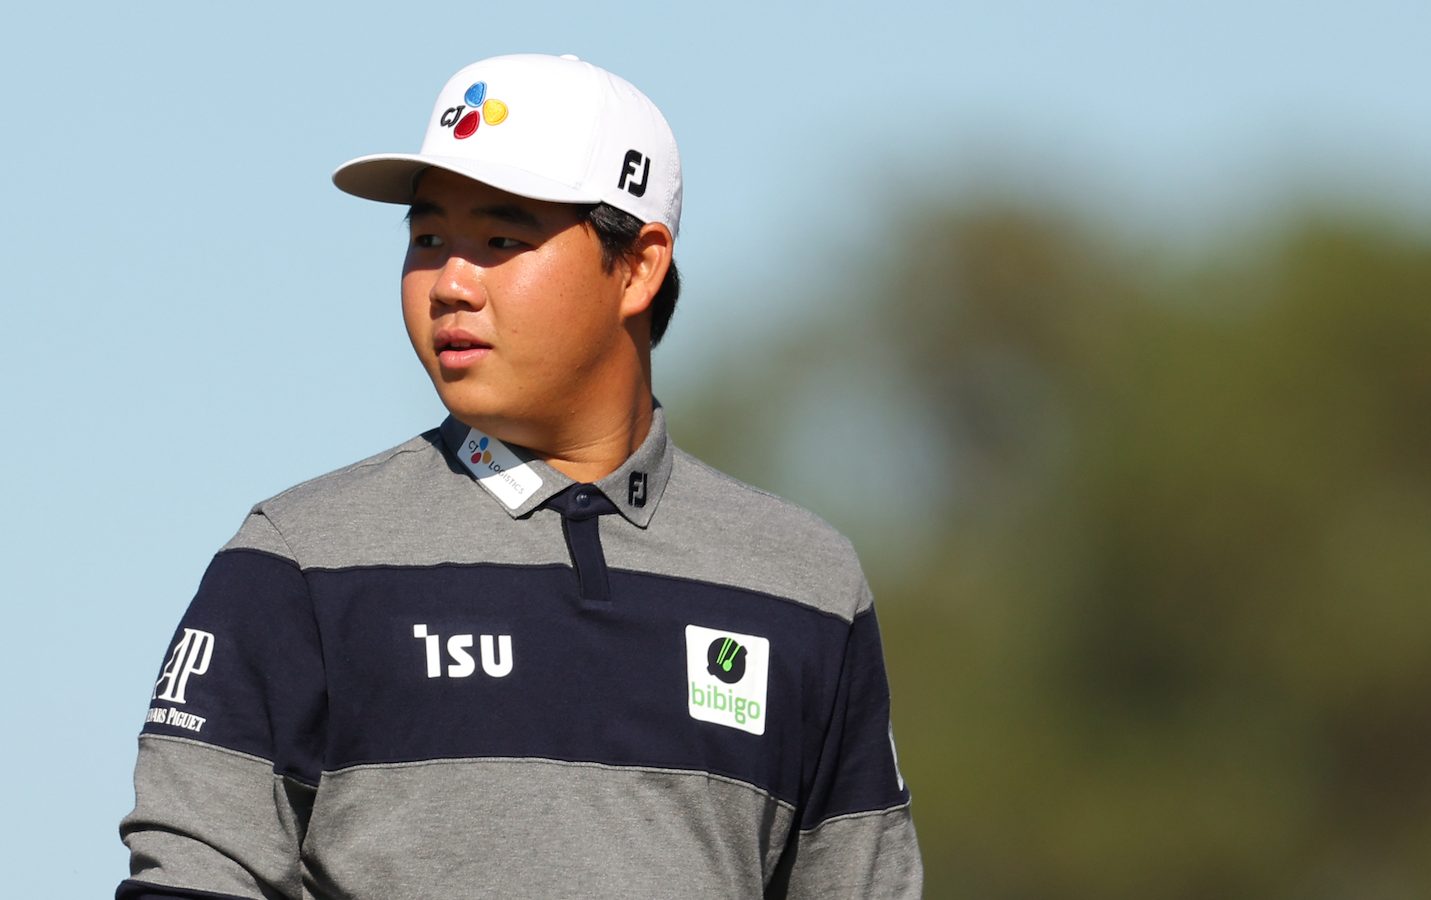 Korean sensation Tom Kim matches McIlroy with opening 66 at CJ Cup